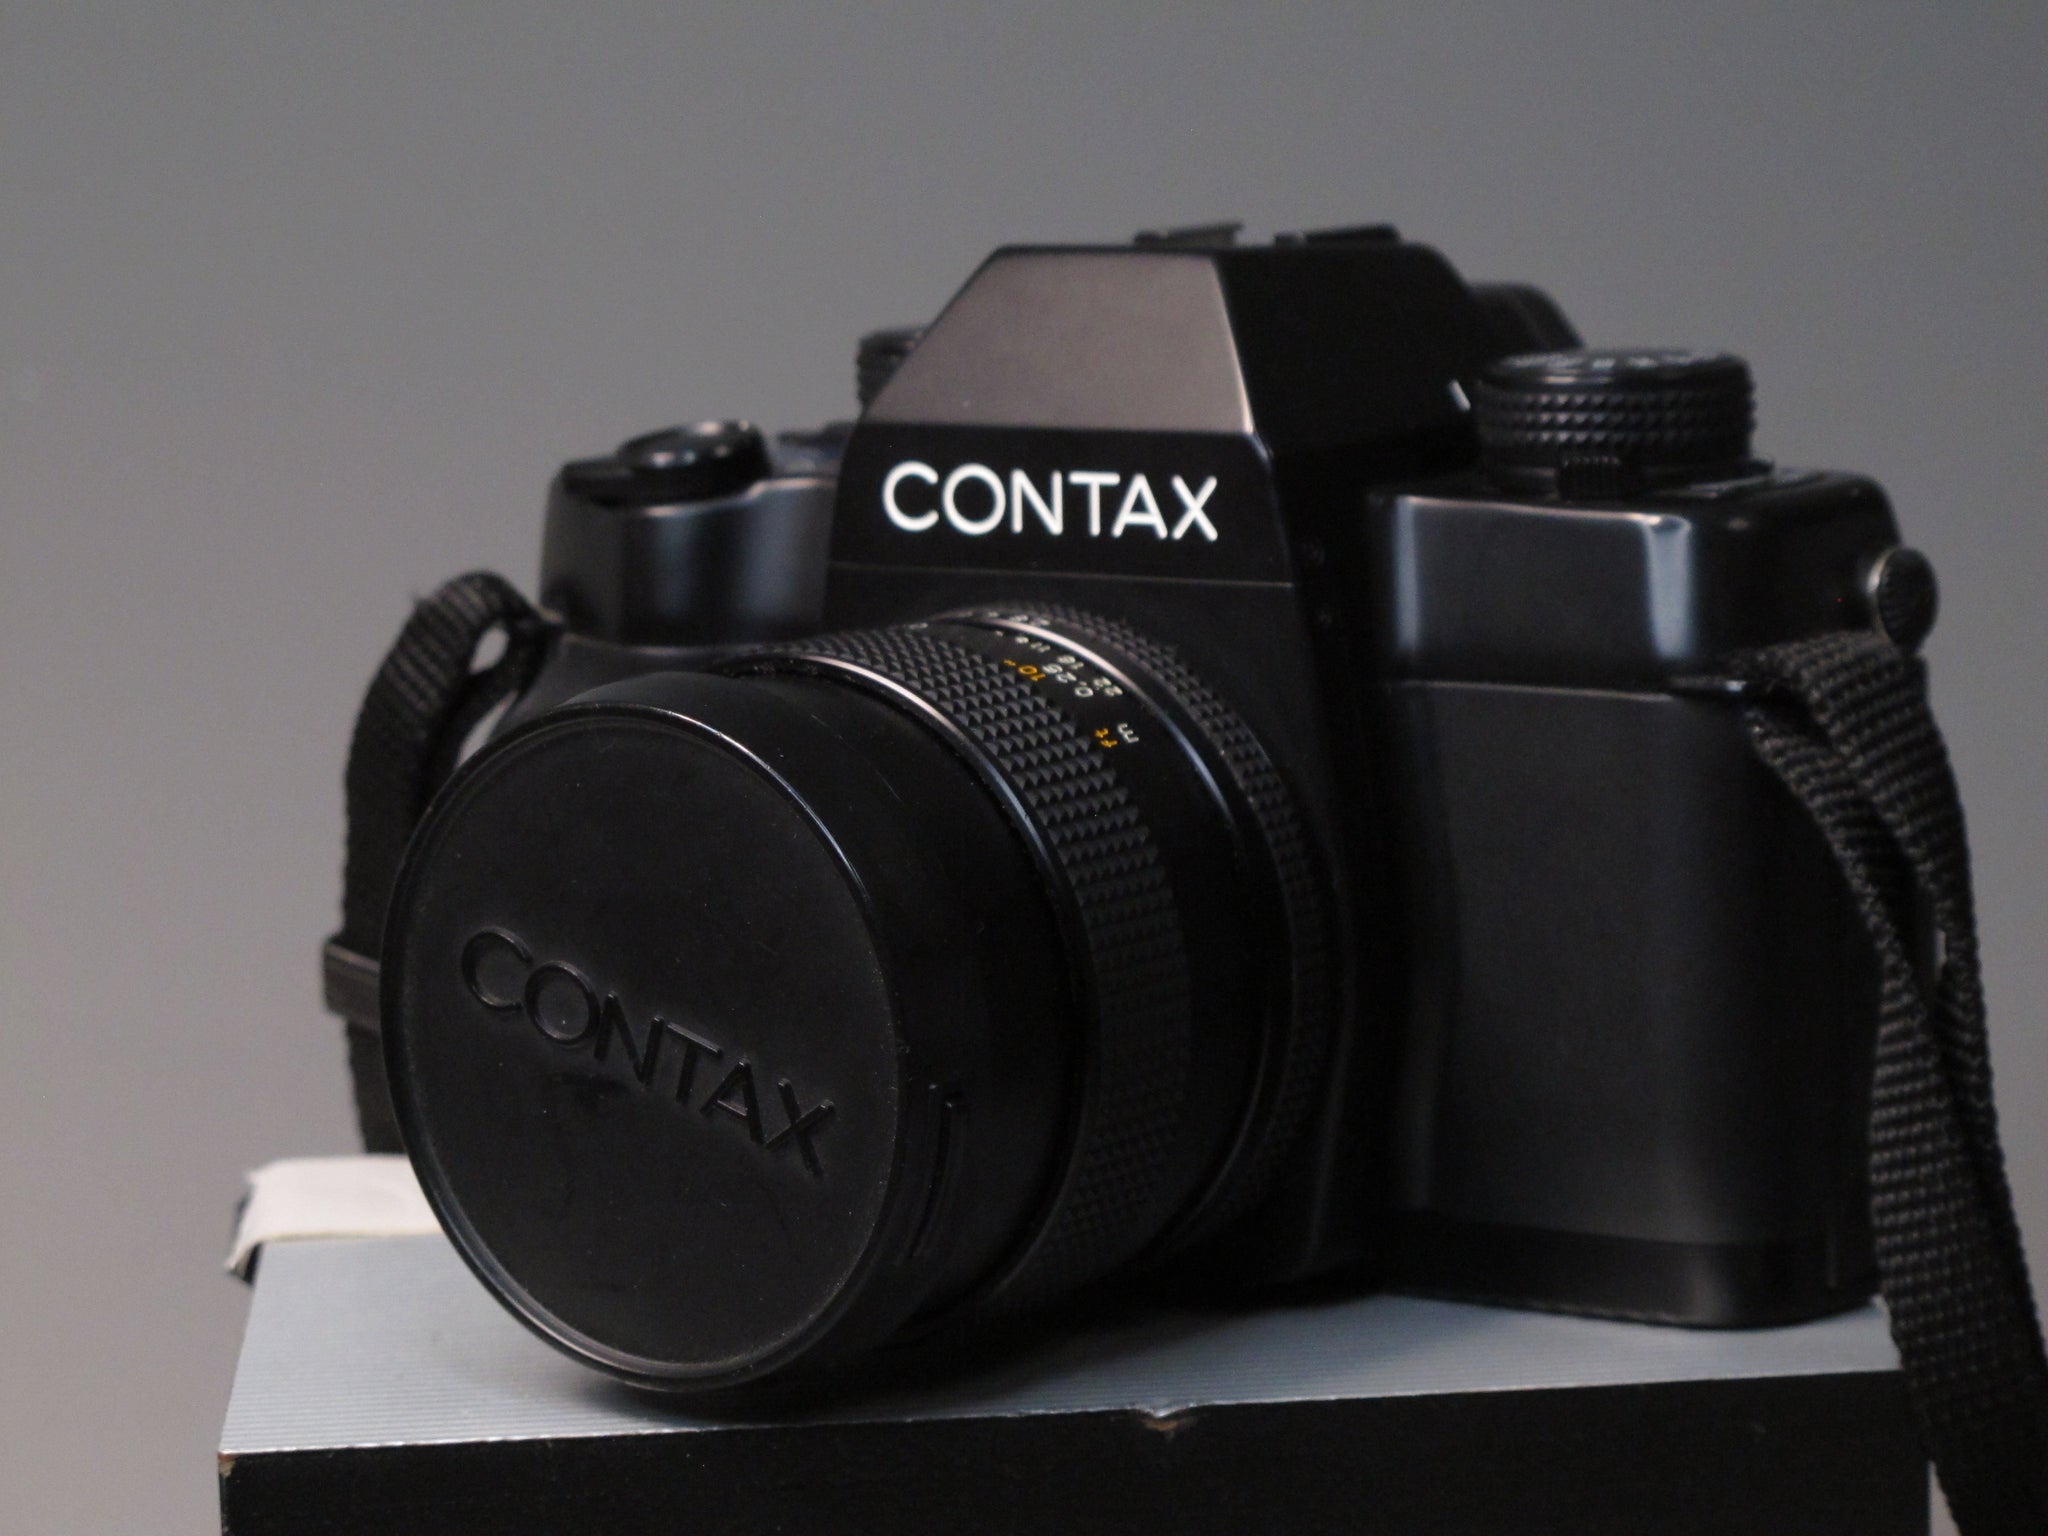 CONTAX ST 35mm Camera with Zeiss Distagon 28mm f2.8 T* and Zeiss